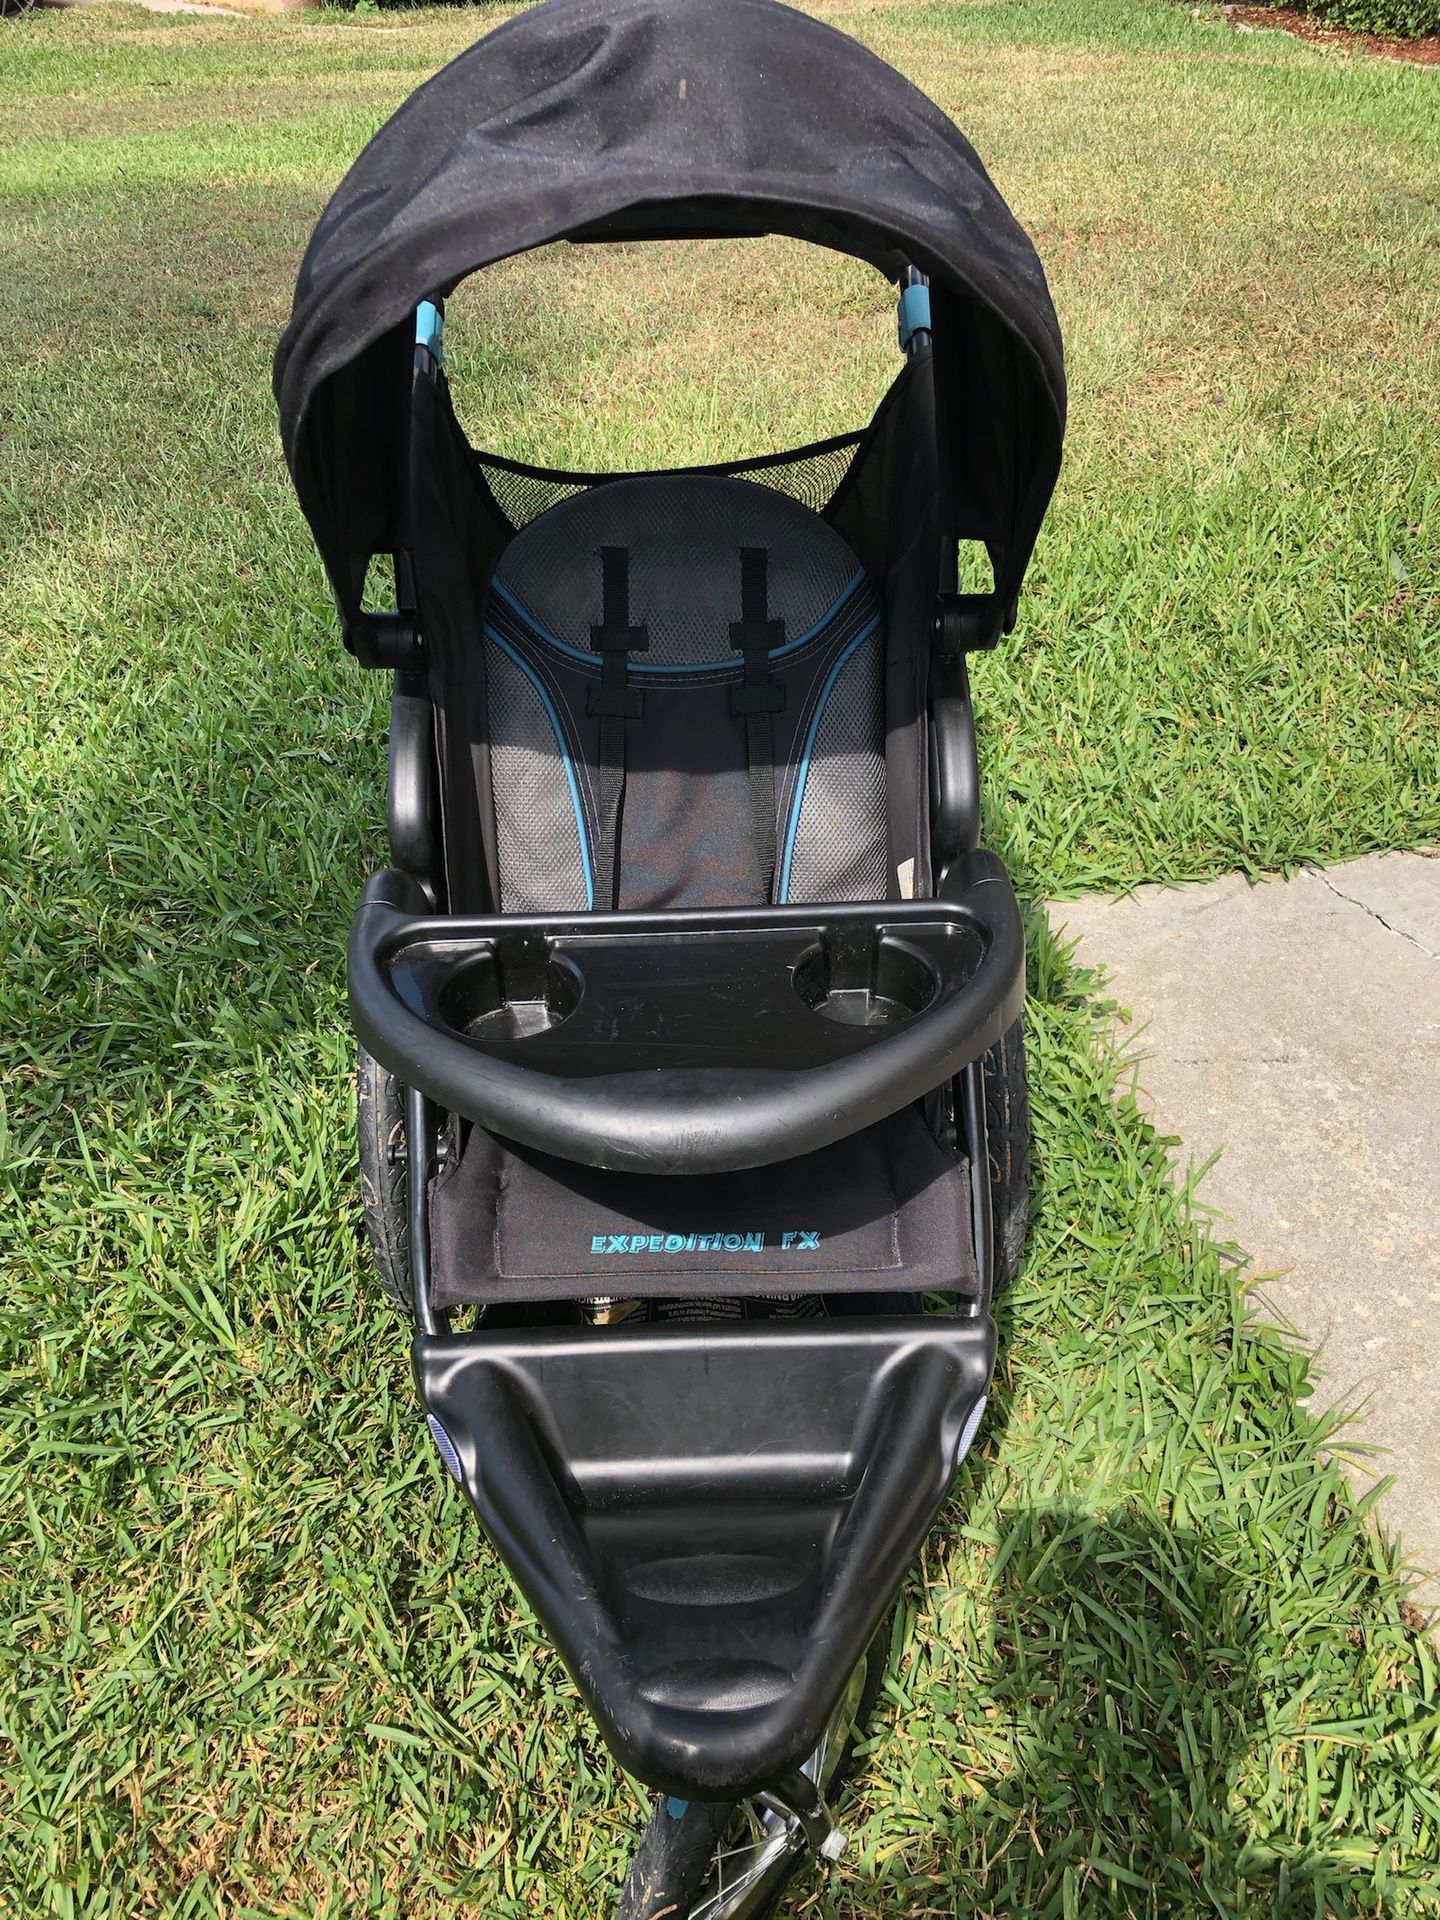 Baby trend Expedition fx jogging stroller